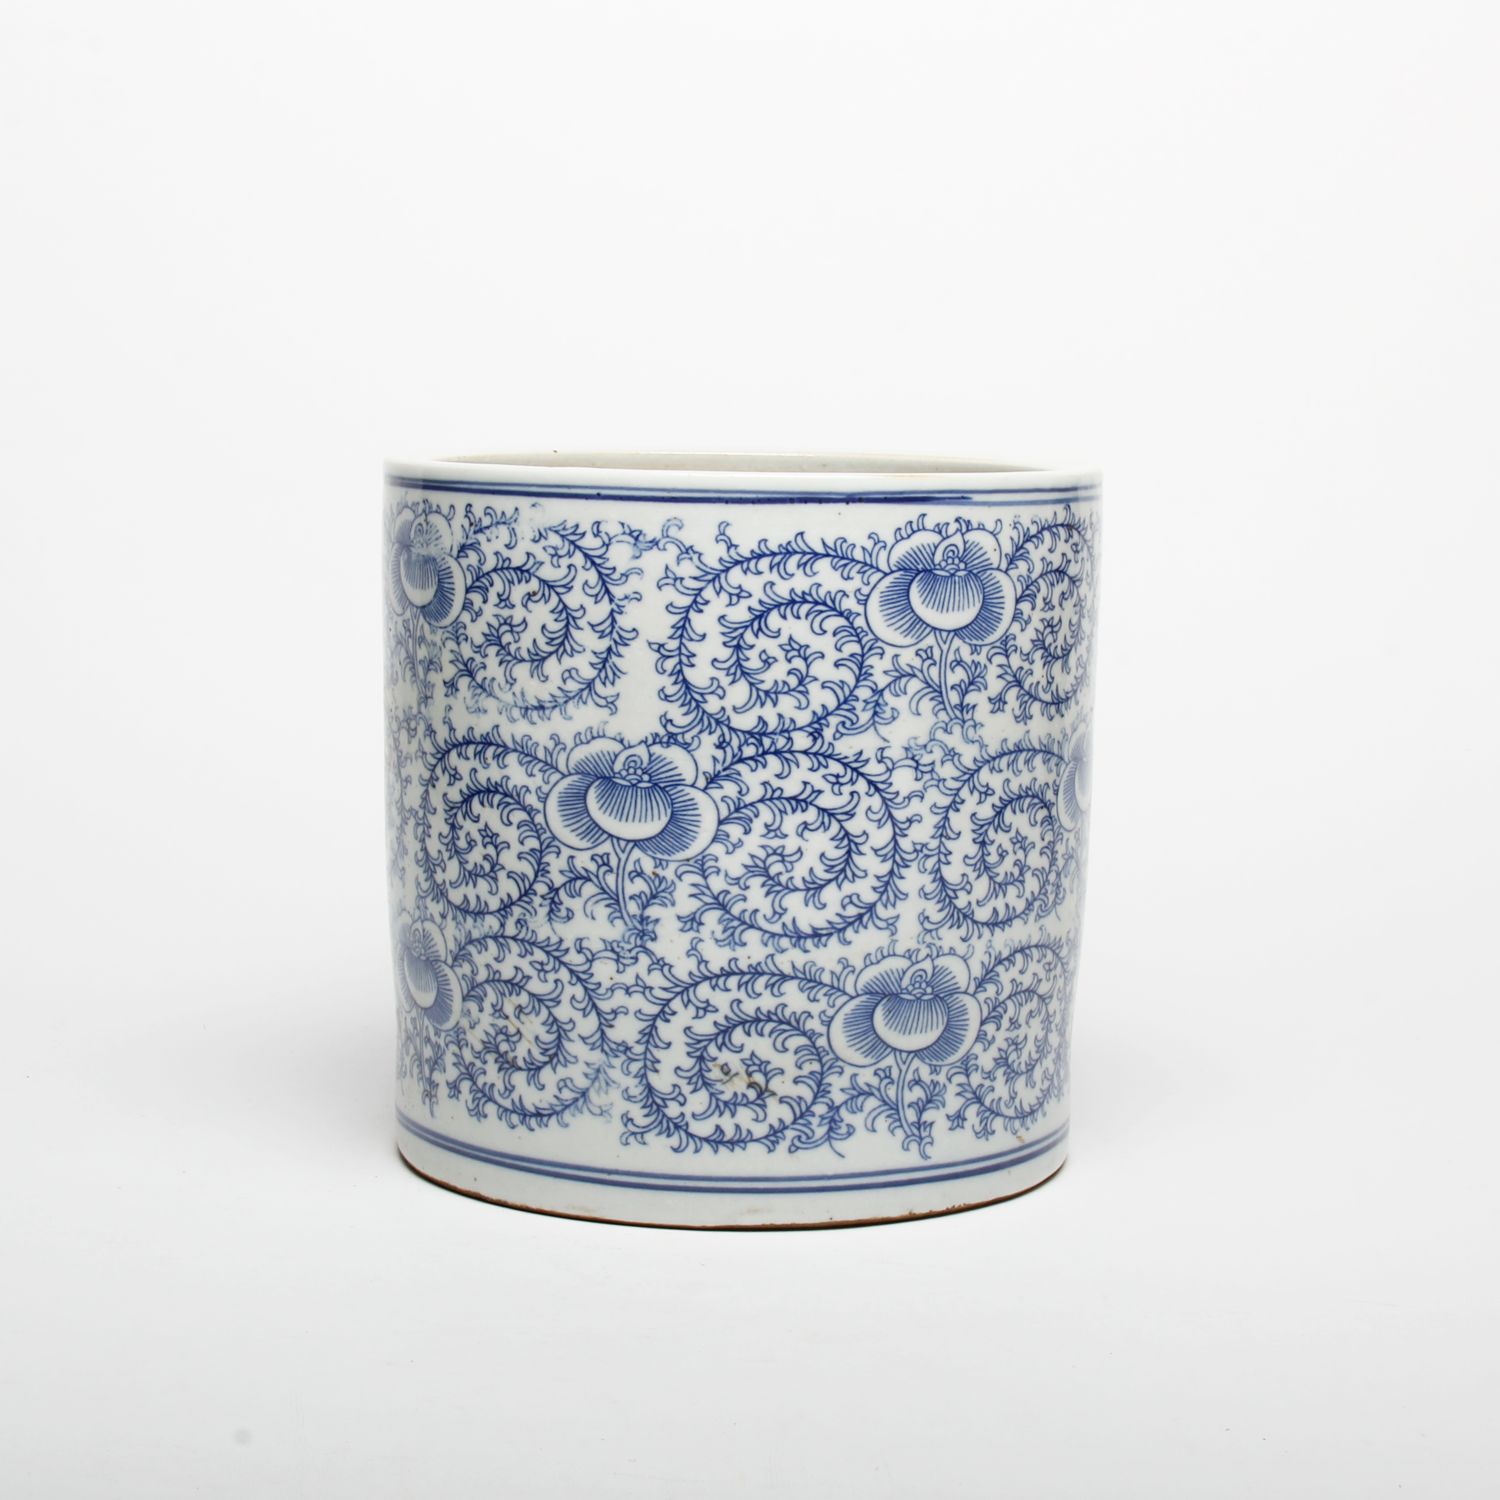 Middle Kingdom: Scrolling Peony Cachepot Product Image 1 of 4